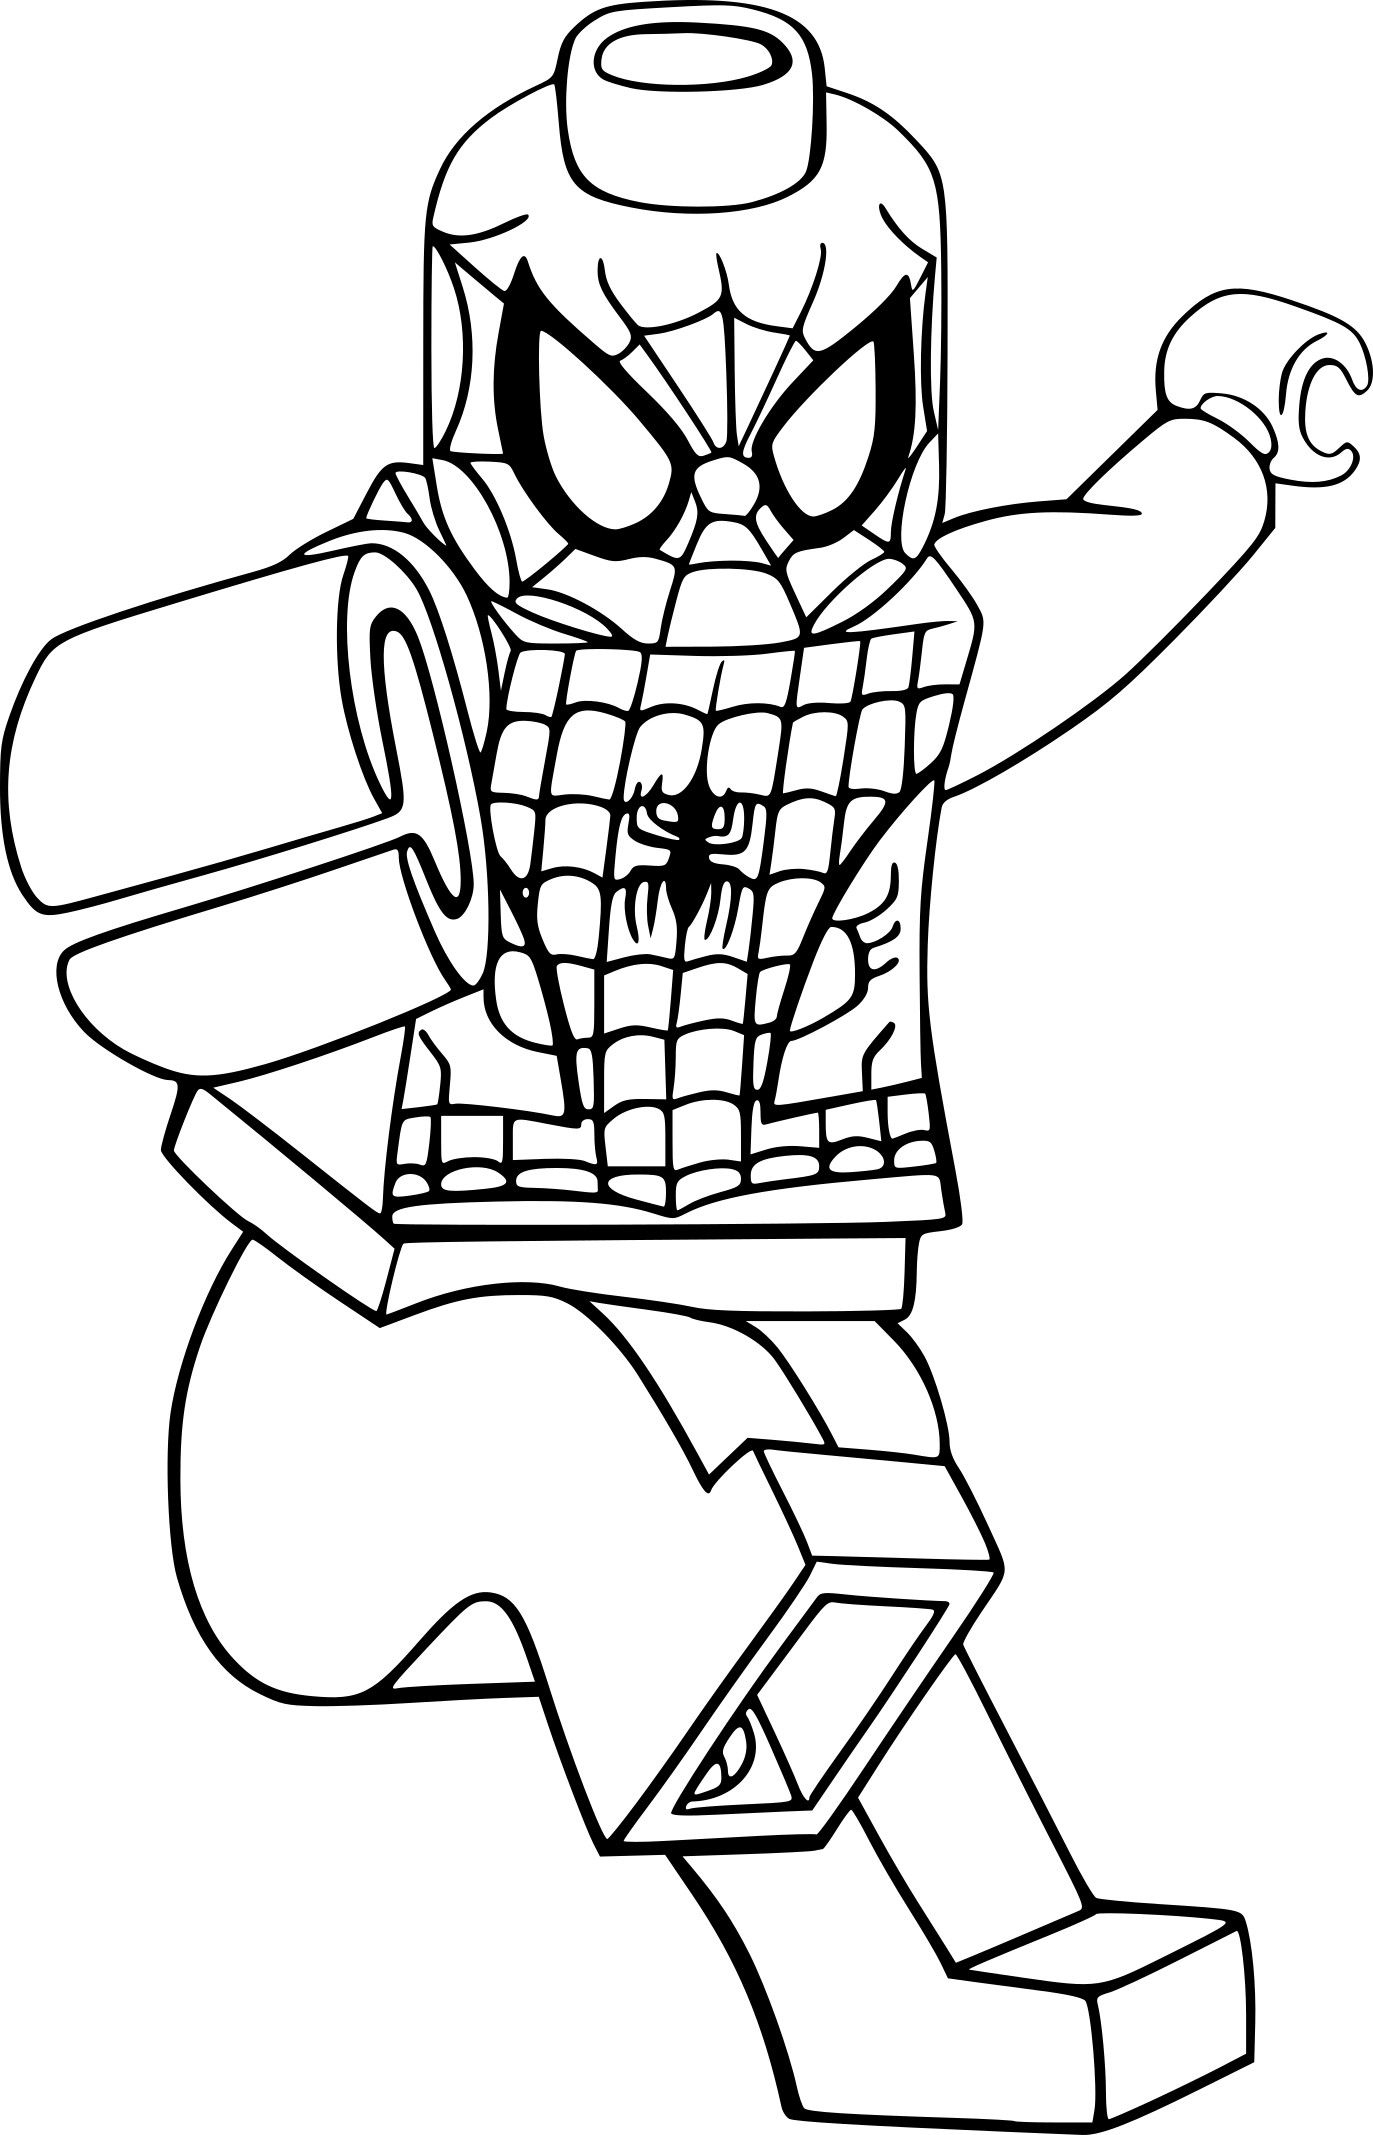 Pin By Anelka On Coloriages Sympas  Spiderman Coloring encequiconcerne Spiderman Coloriage 